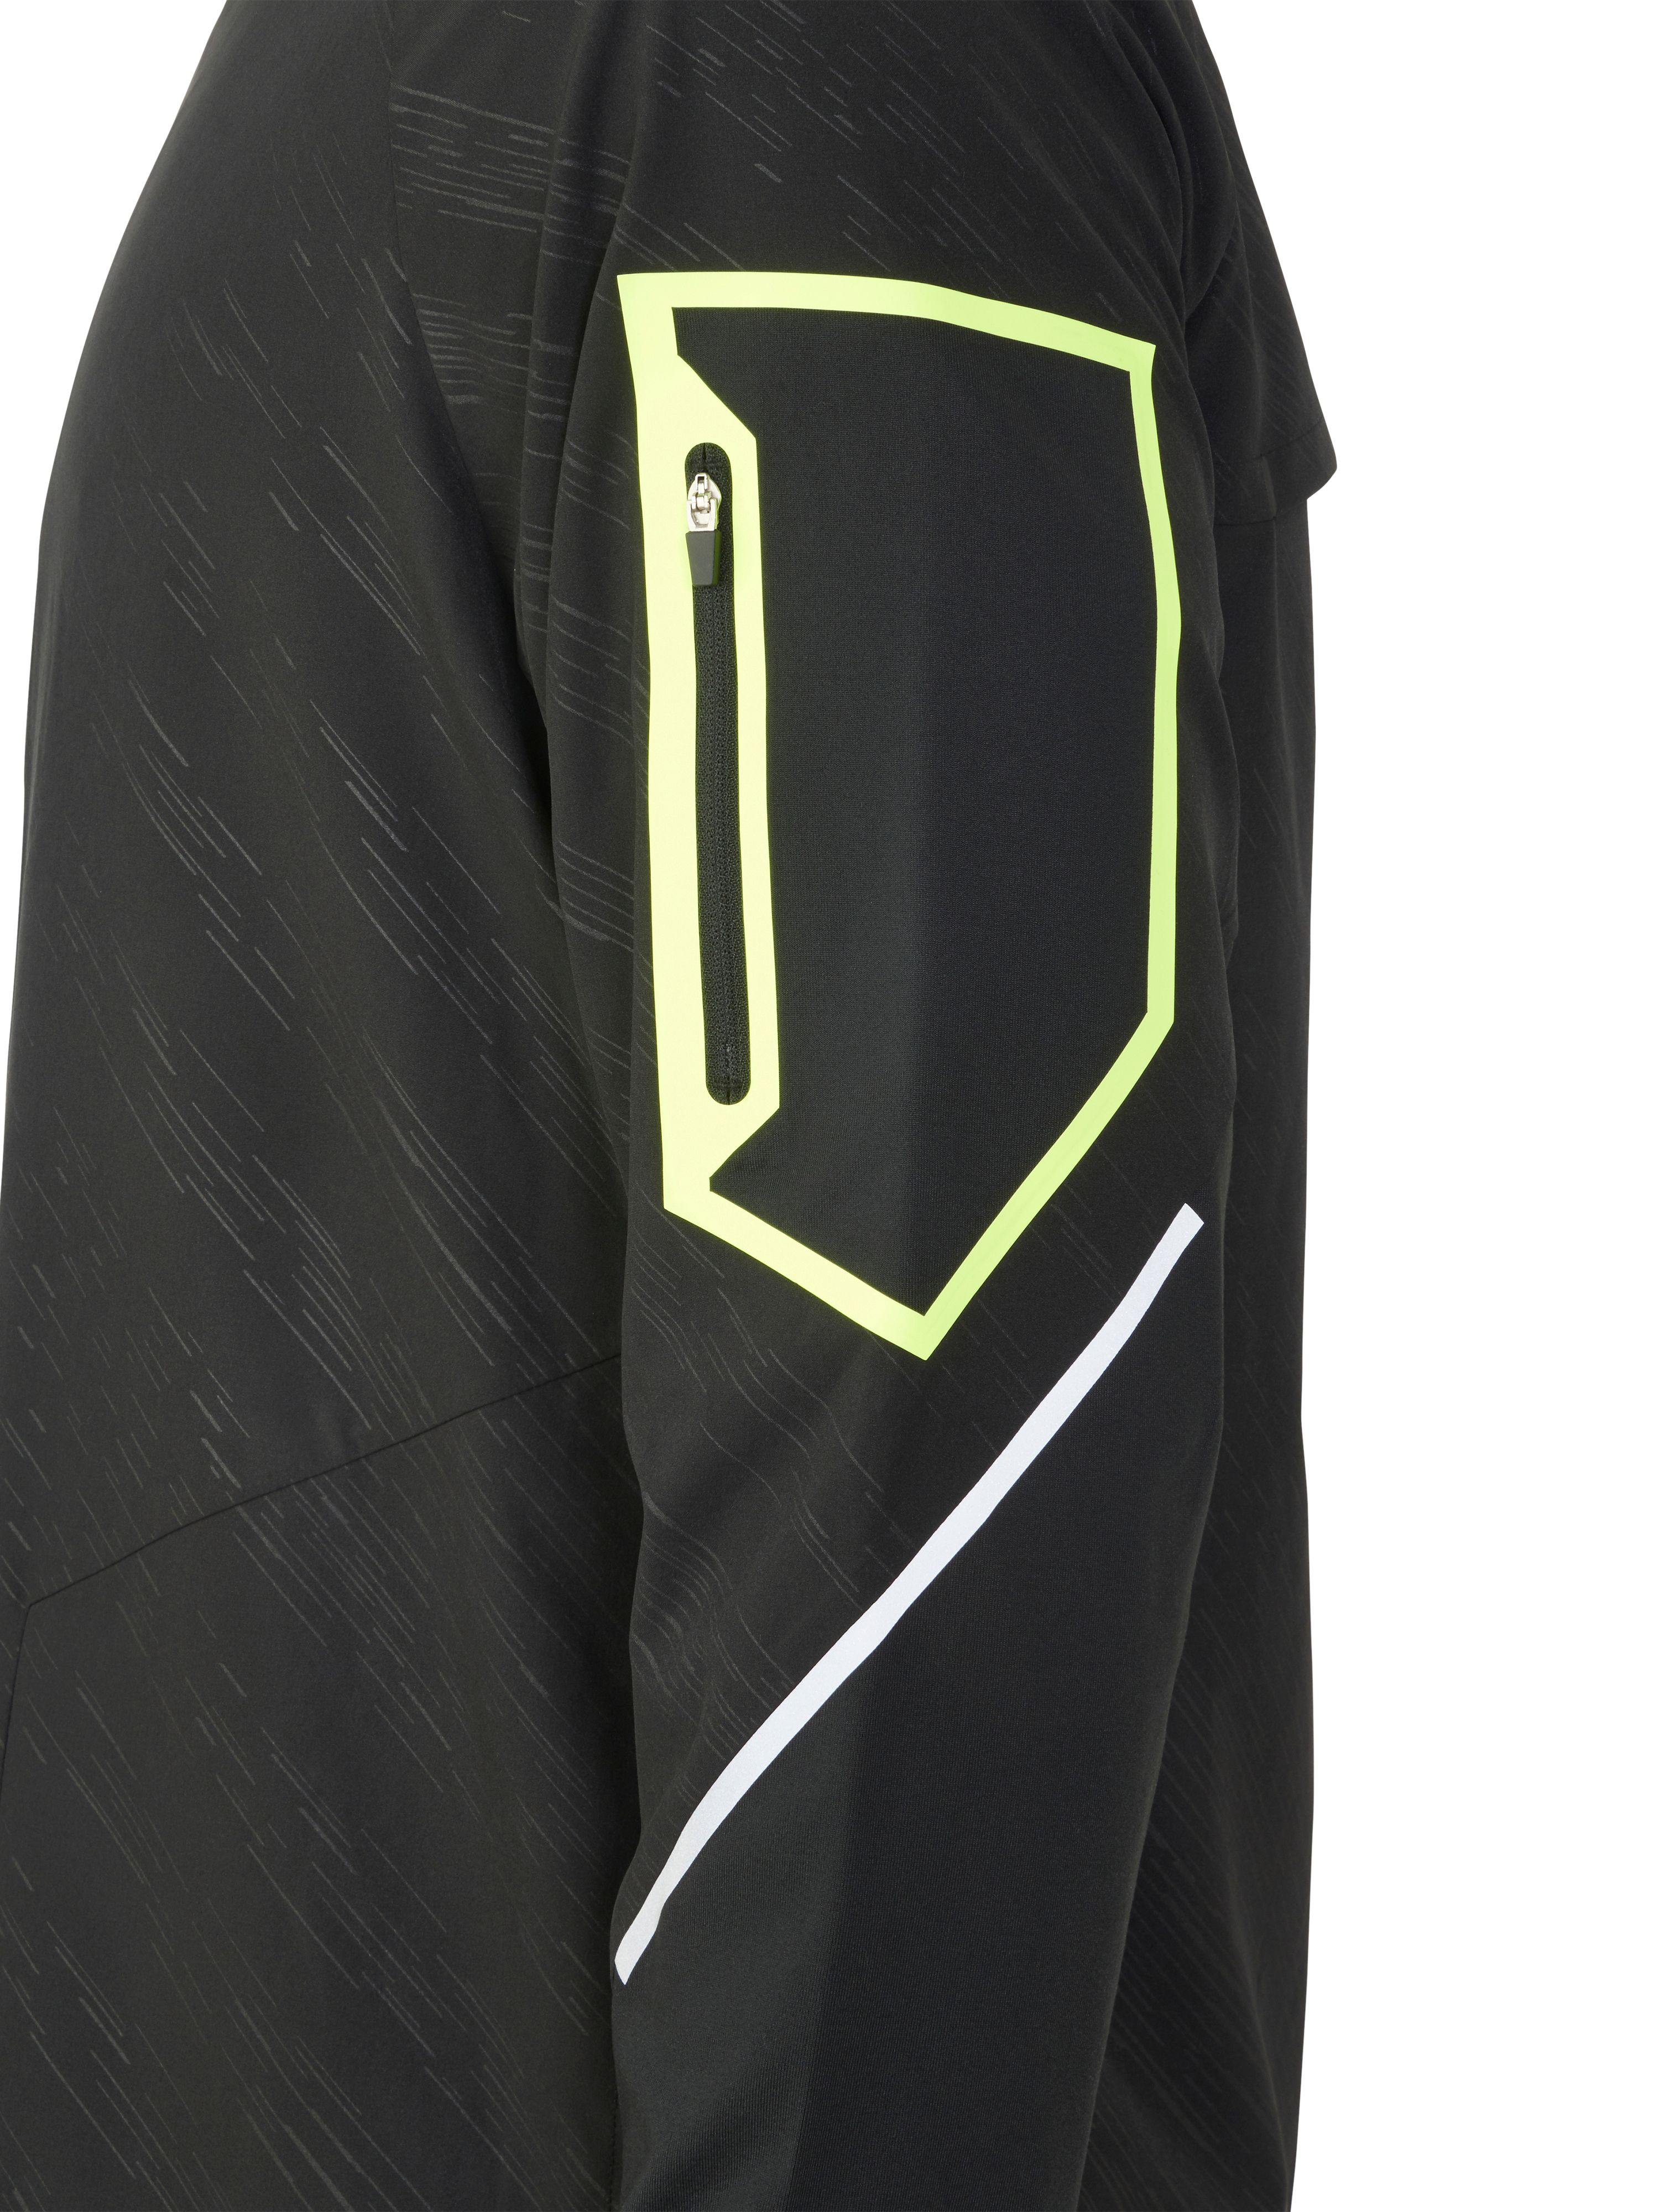 Russell Exclusive Men's Core Performance Jacket - image 3 of 7